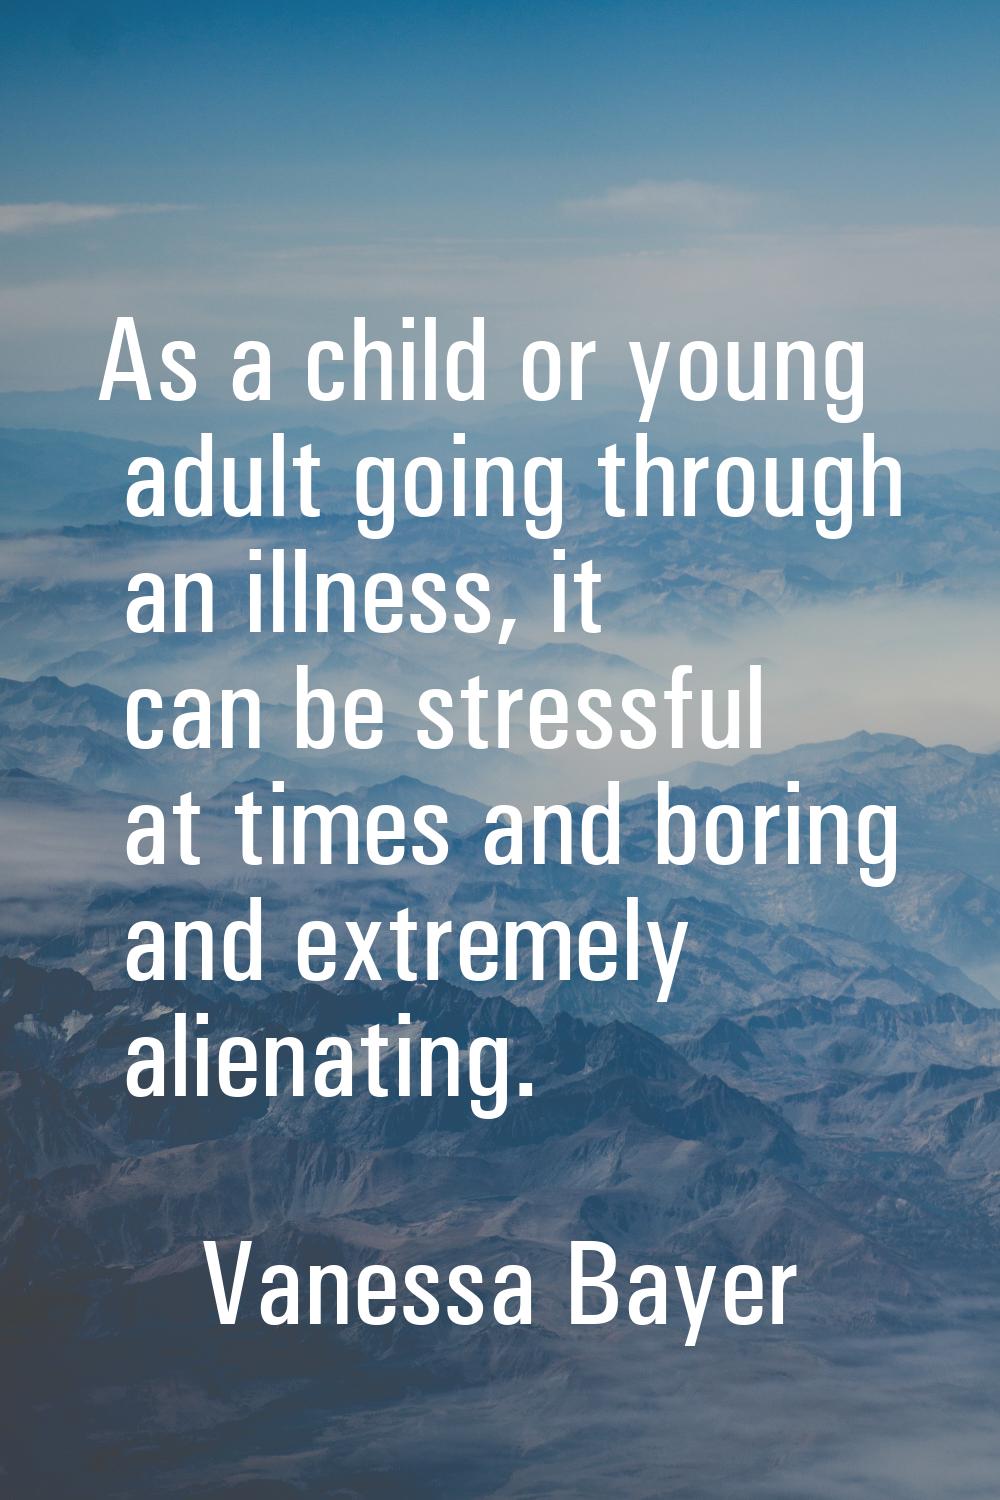 As a child or young adult going through an illness, it can be stressful at times and boring and ext